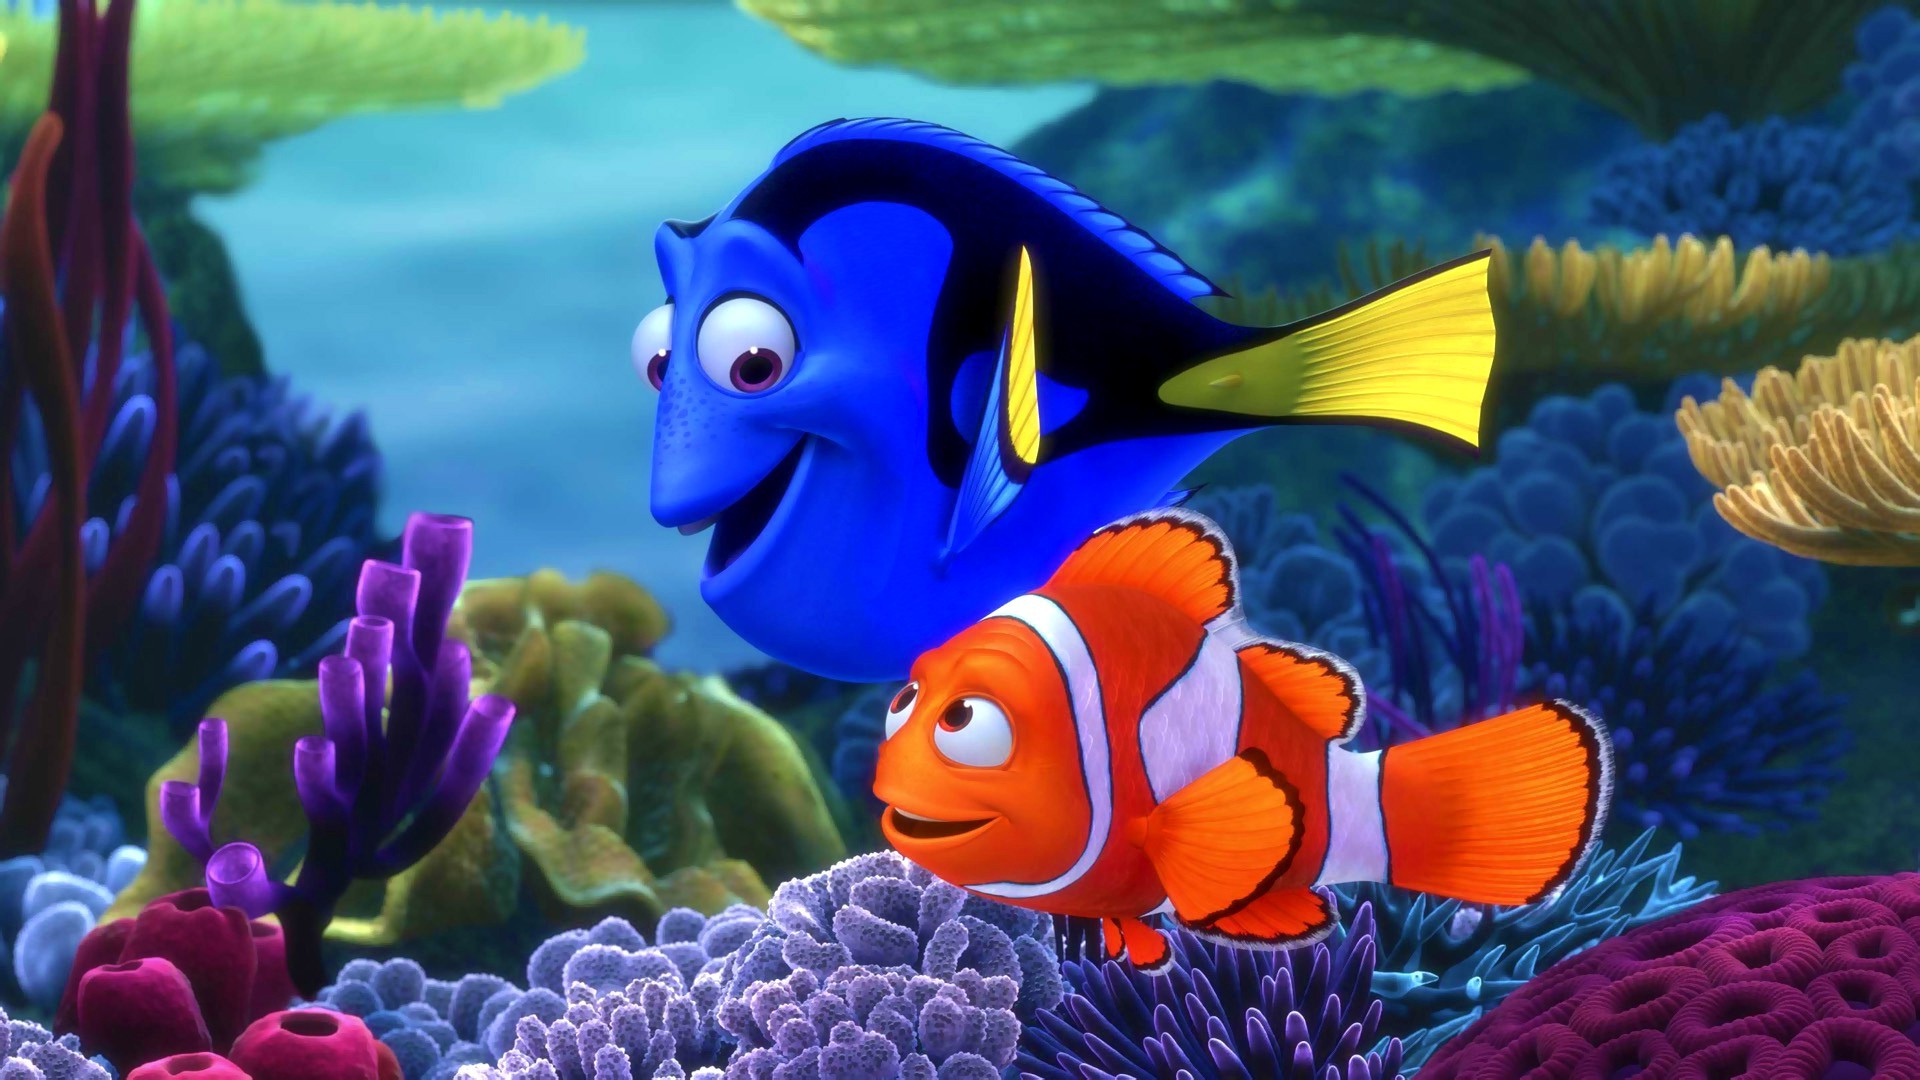 download the new version for iphoneFinding Nemo